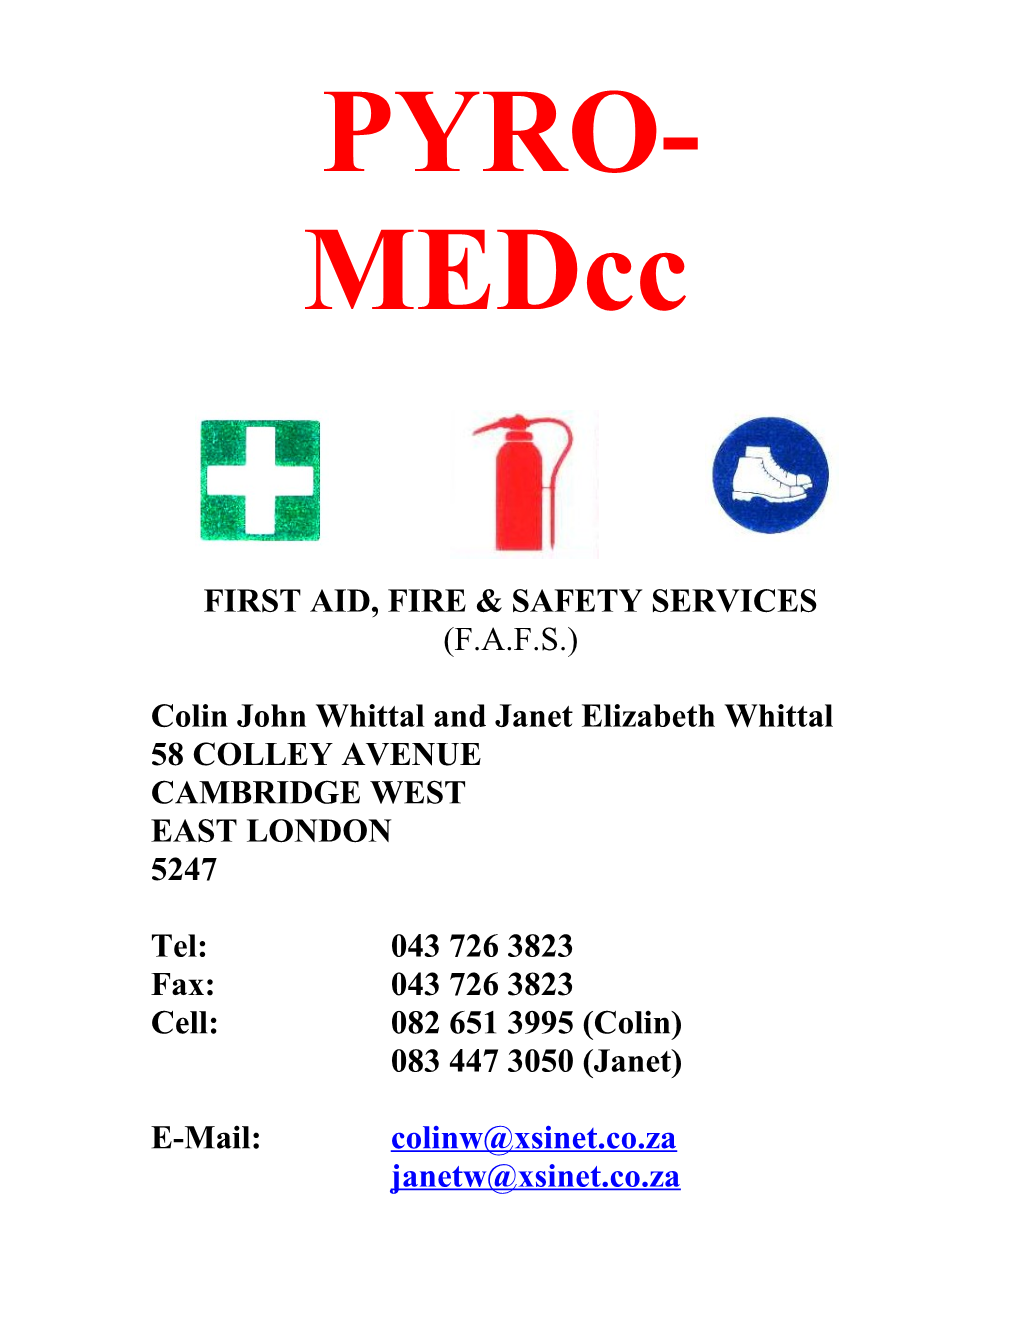 First Aid, Fire & Safety Services